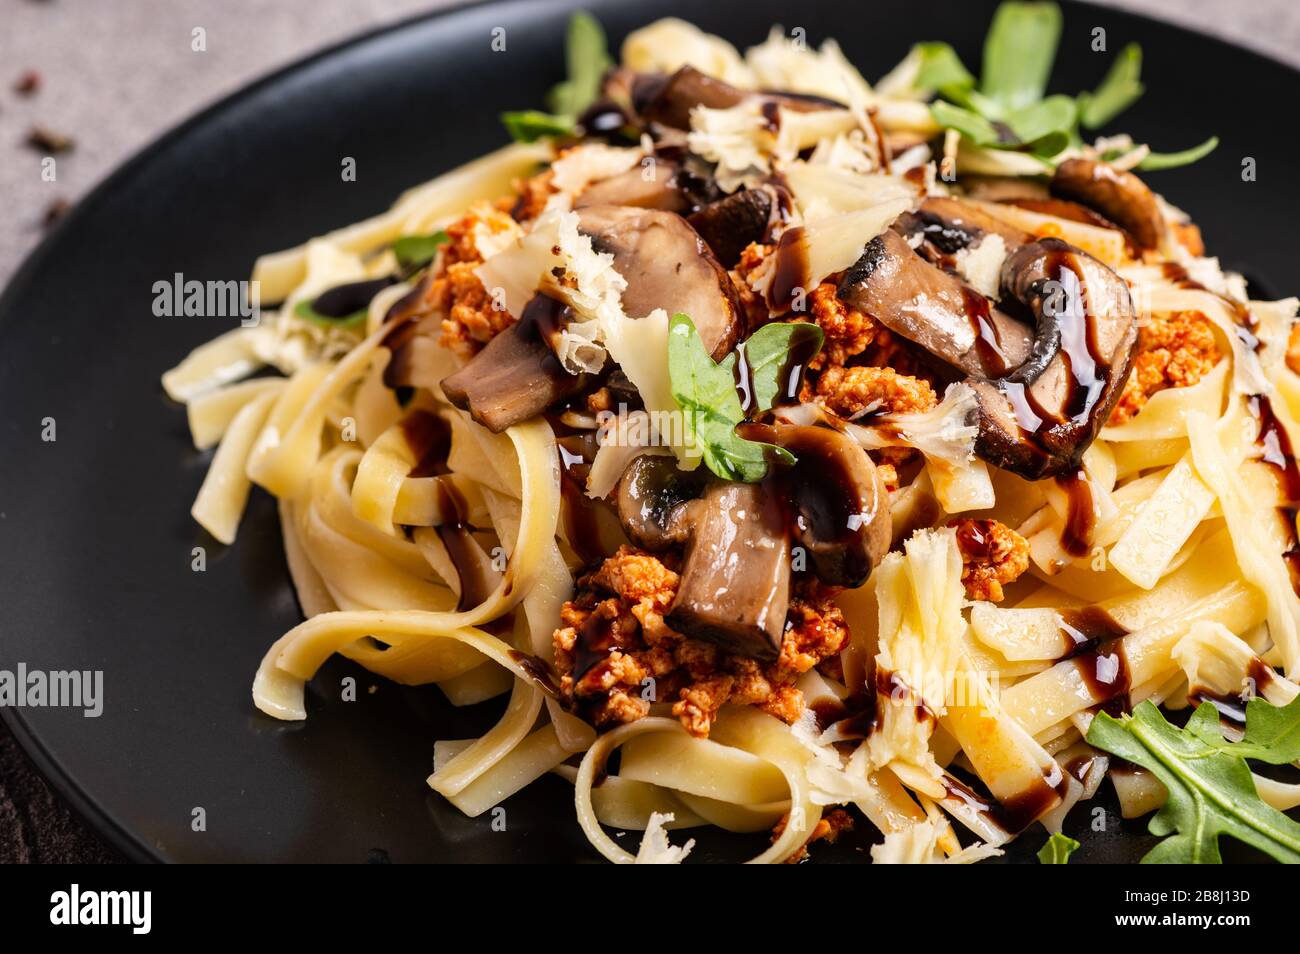 Bolognese pasta with mushrooms and arugula poured balsamic sauce on a black plate. Close-up. Stock Photo